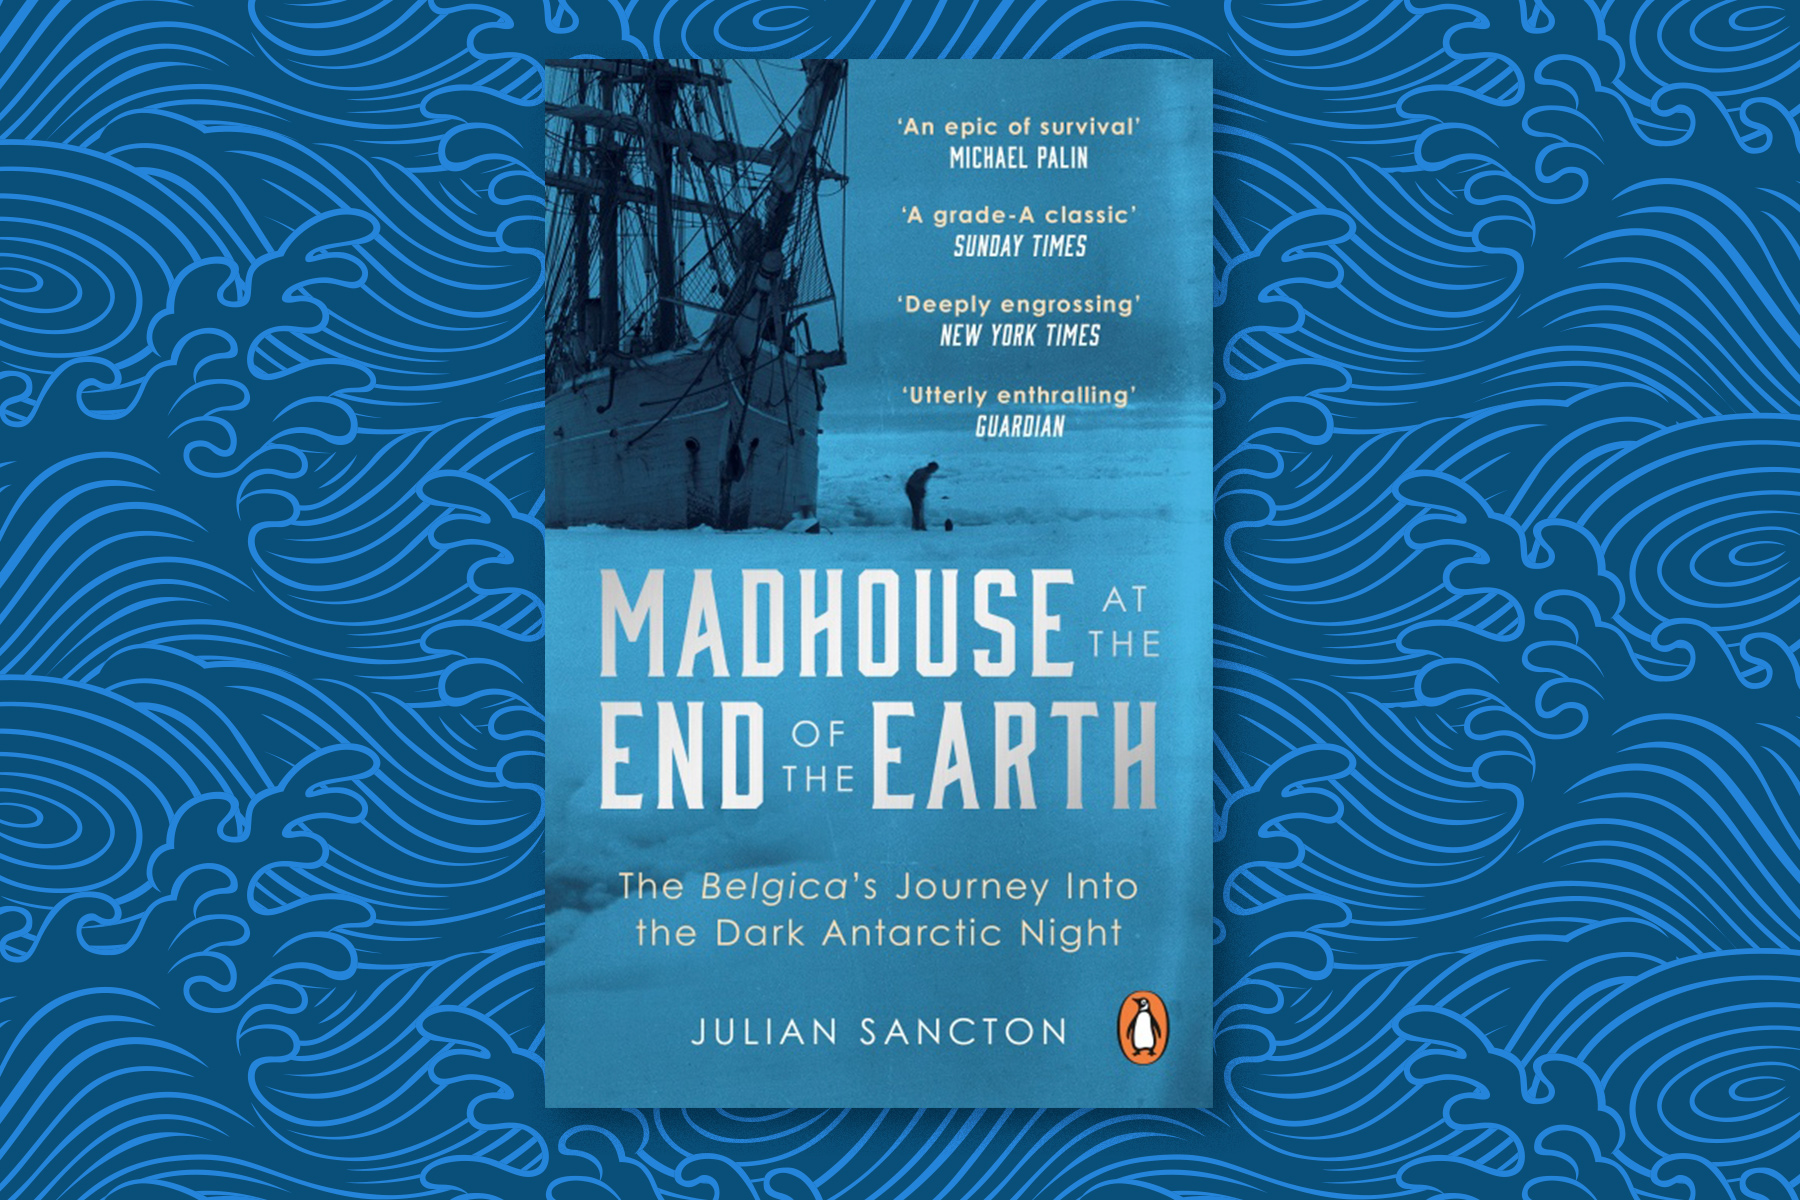 Julian Sancton's book, 'Madhouse at the End of the Earth', laid against a blue, ocean-like background